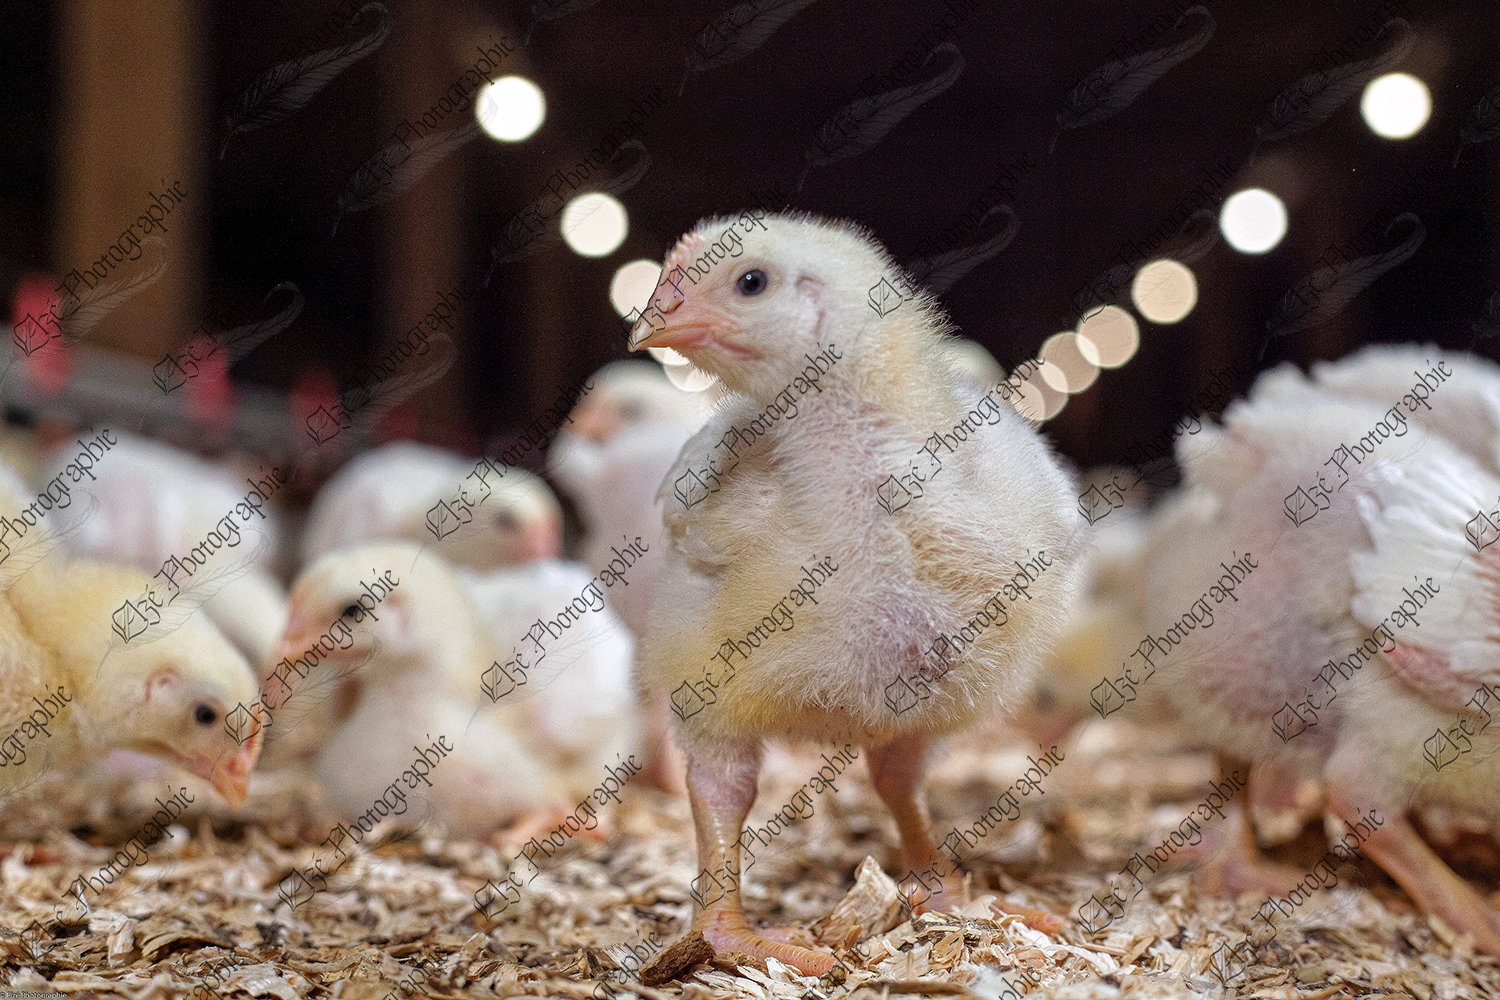 elze_photo_9220_superheros_poussin_volaille_chick_posing_proudly_group